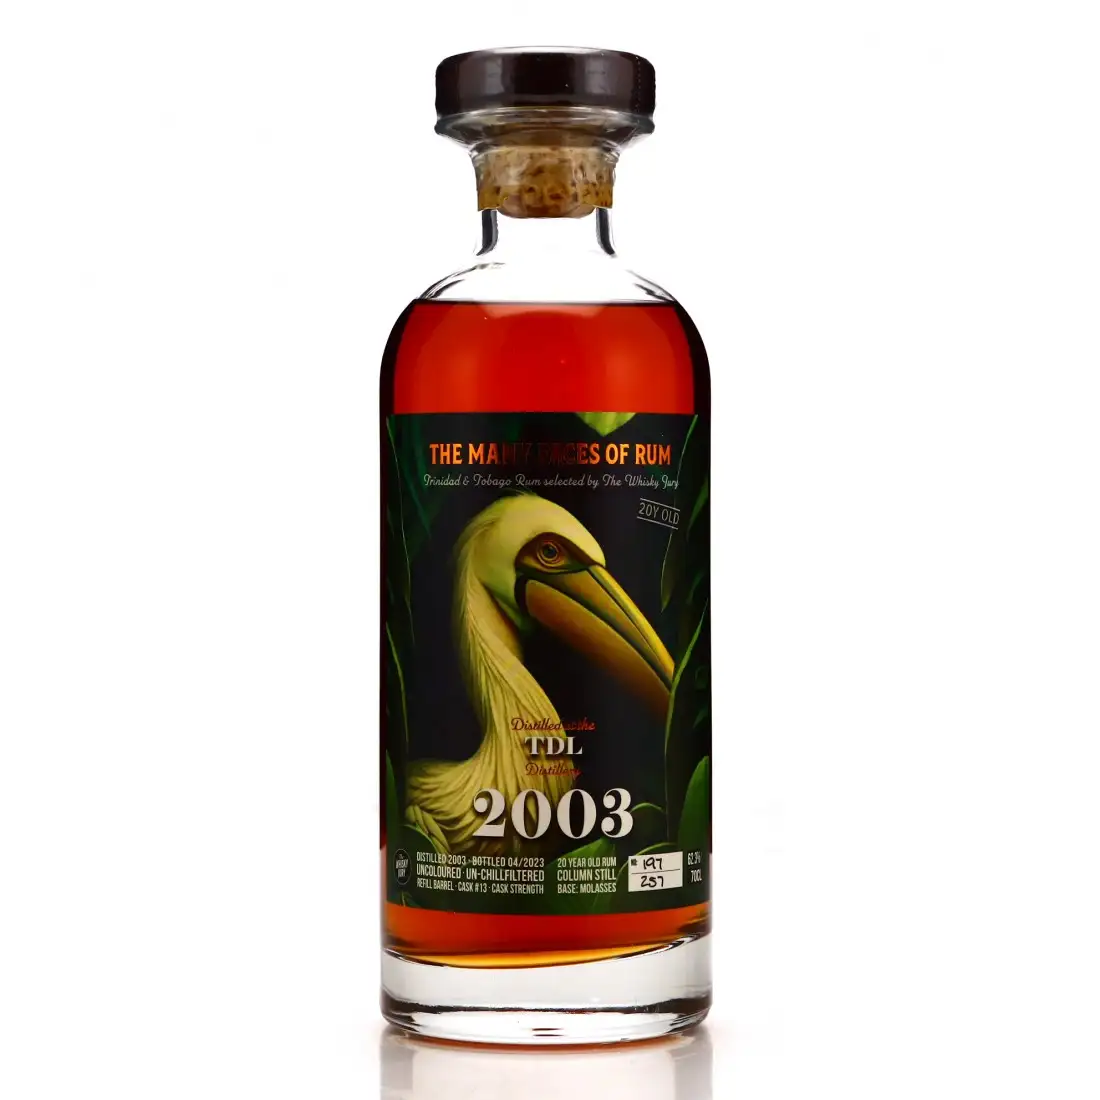 Image of the front of the bottle of the rum The Manu face of rums Trinidad Rum